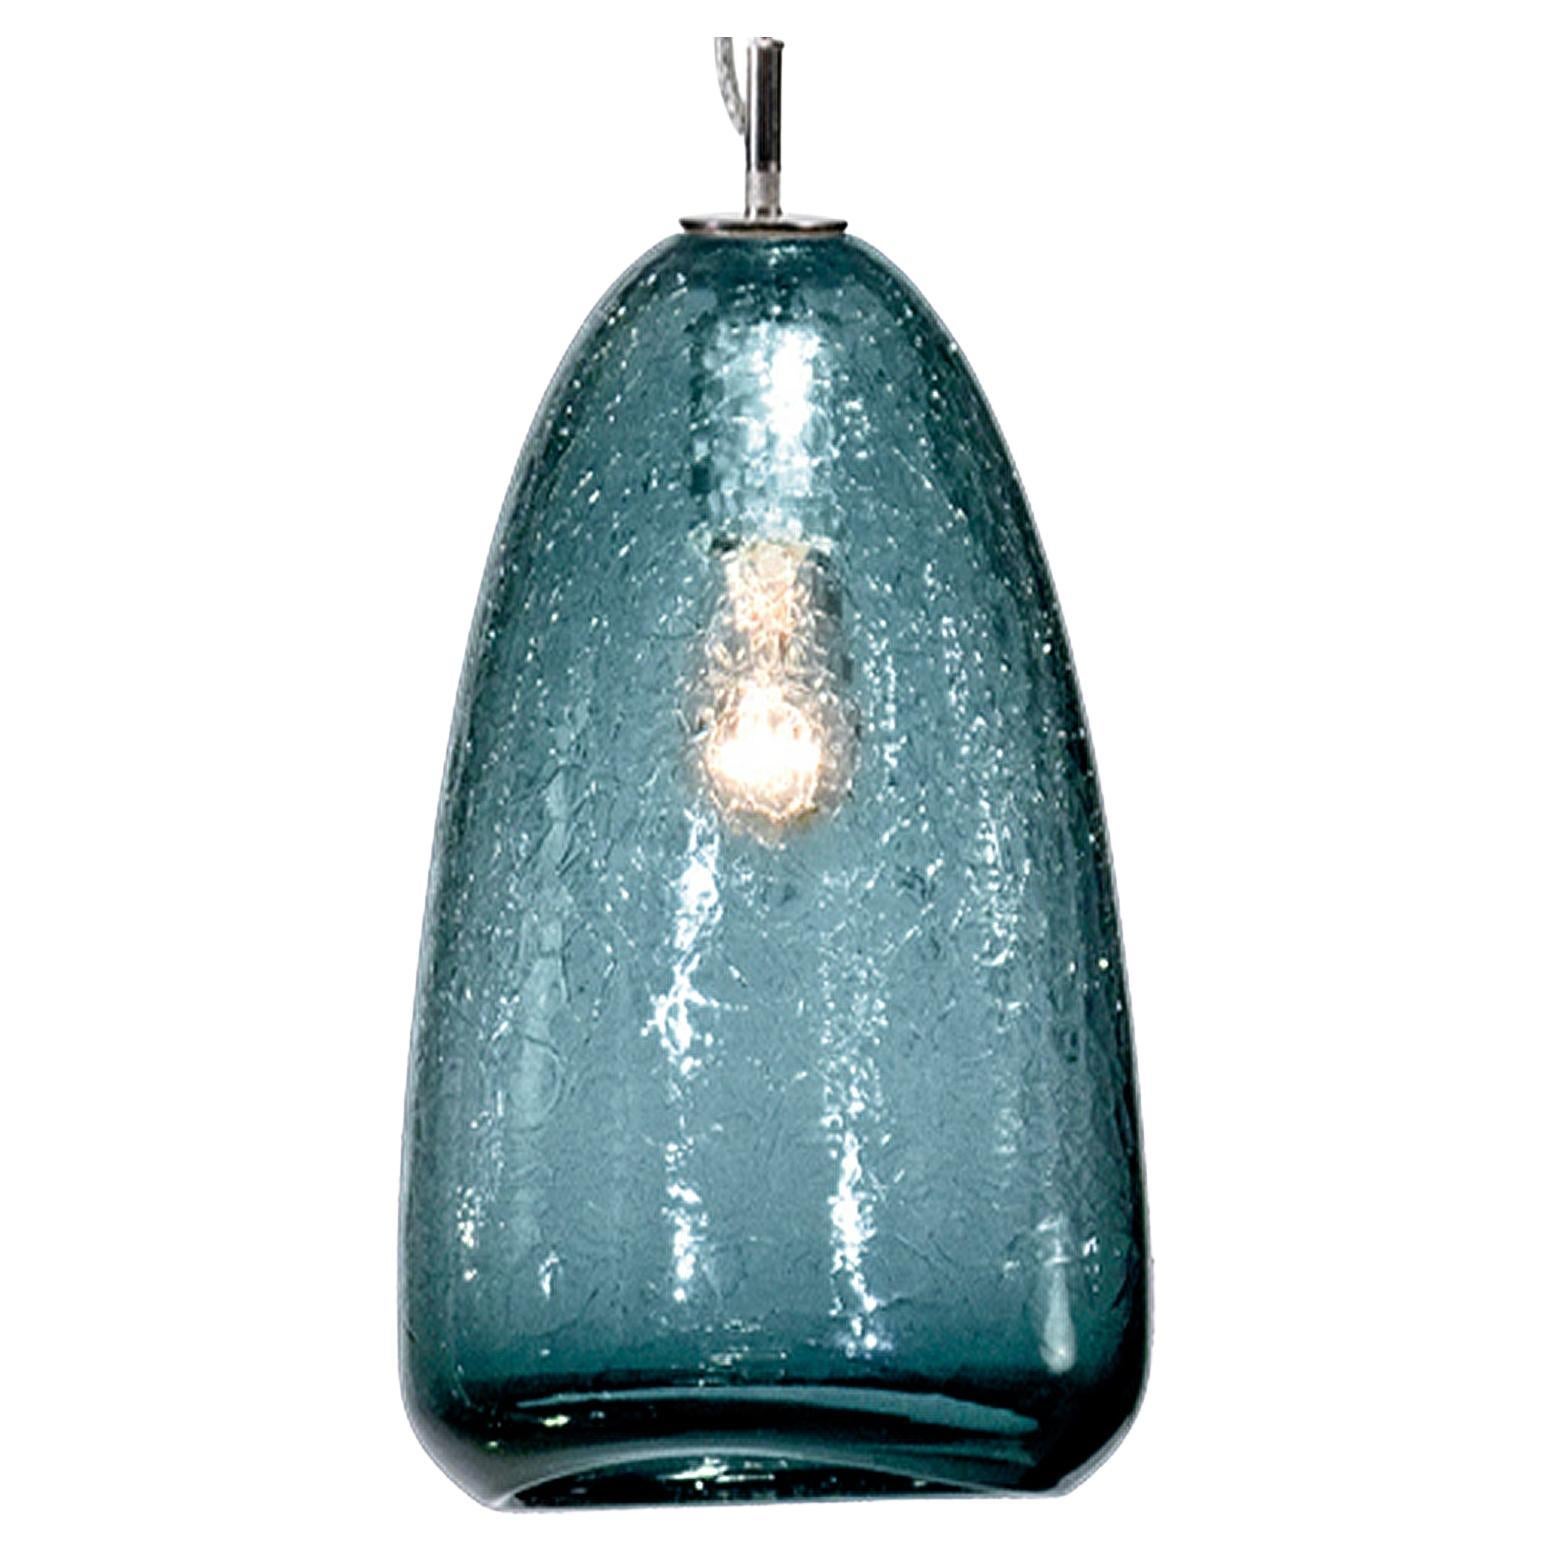 Teal Summit Pendant from the Boa Lighting Collection